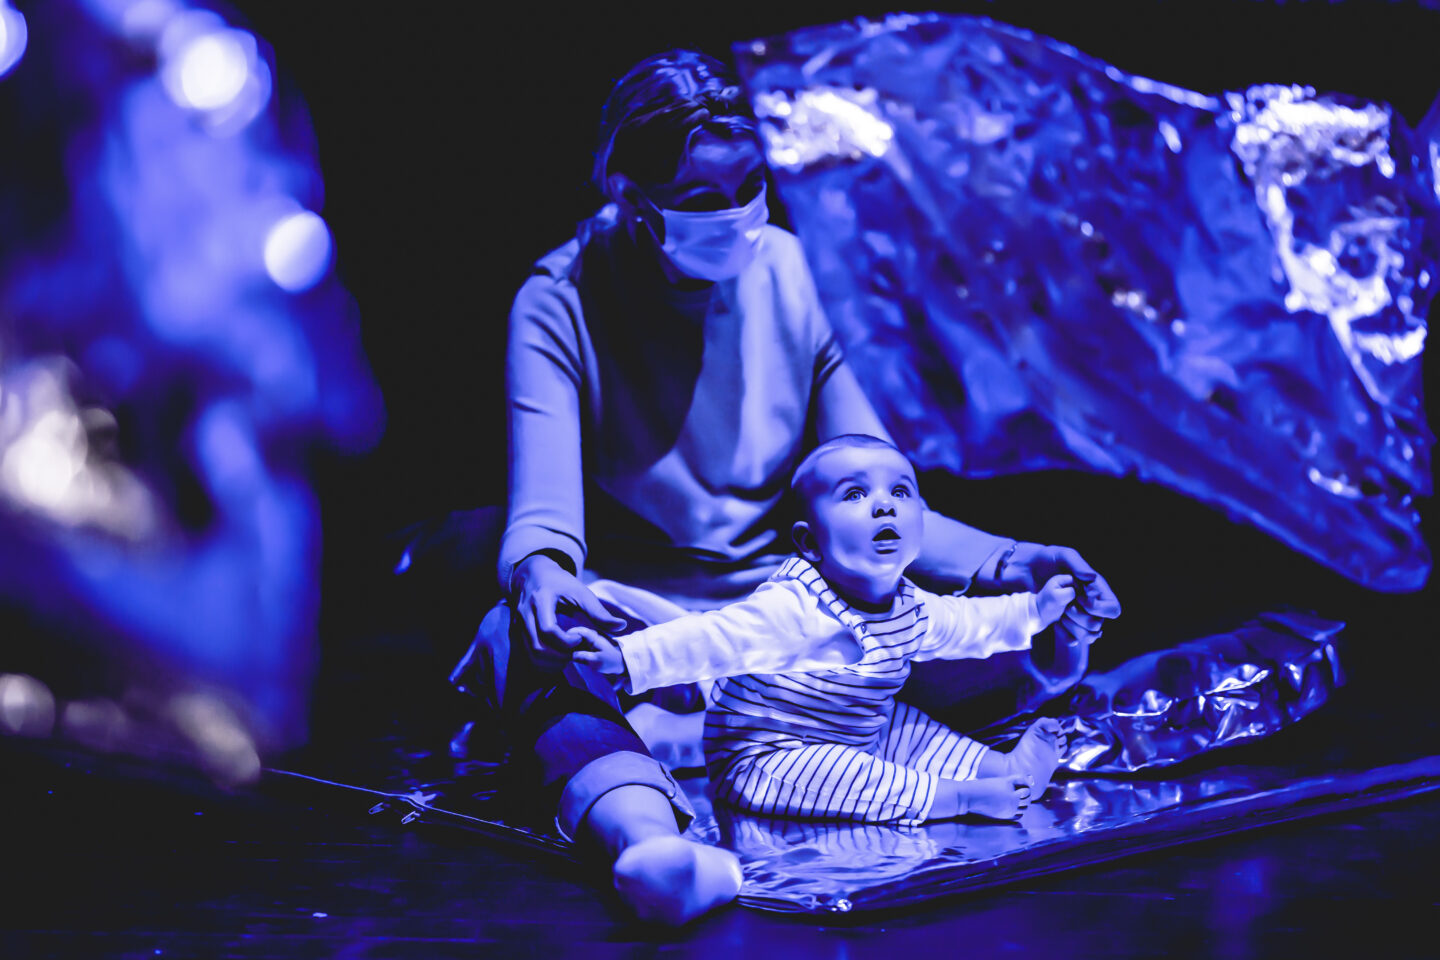 a baby sits on a silver cushion staring at silver foil dancing in front of it. everything is saturated in blue